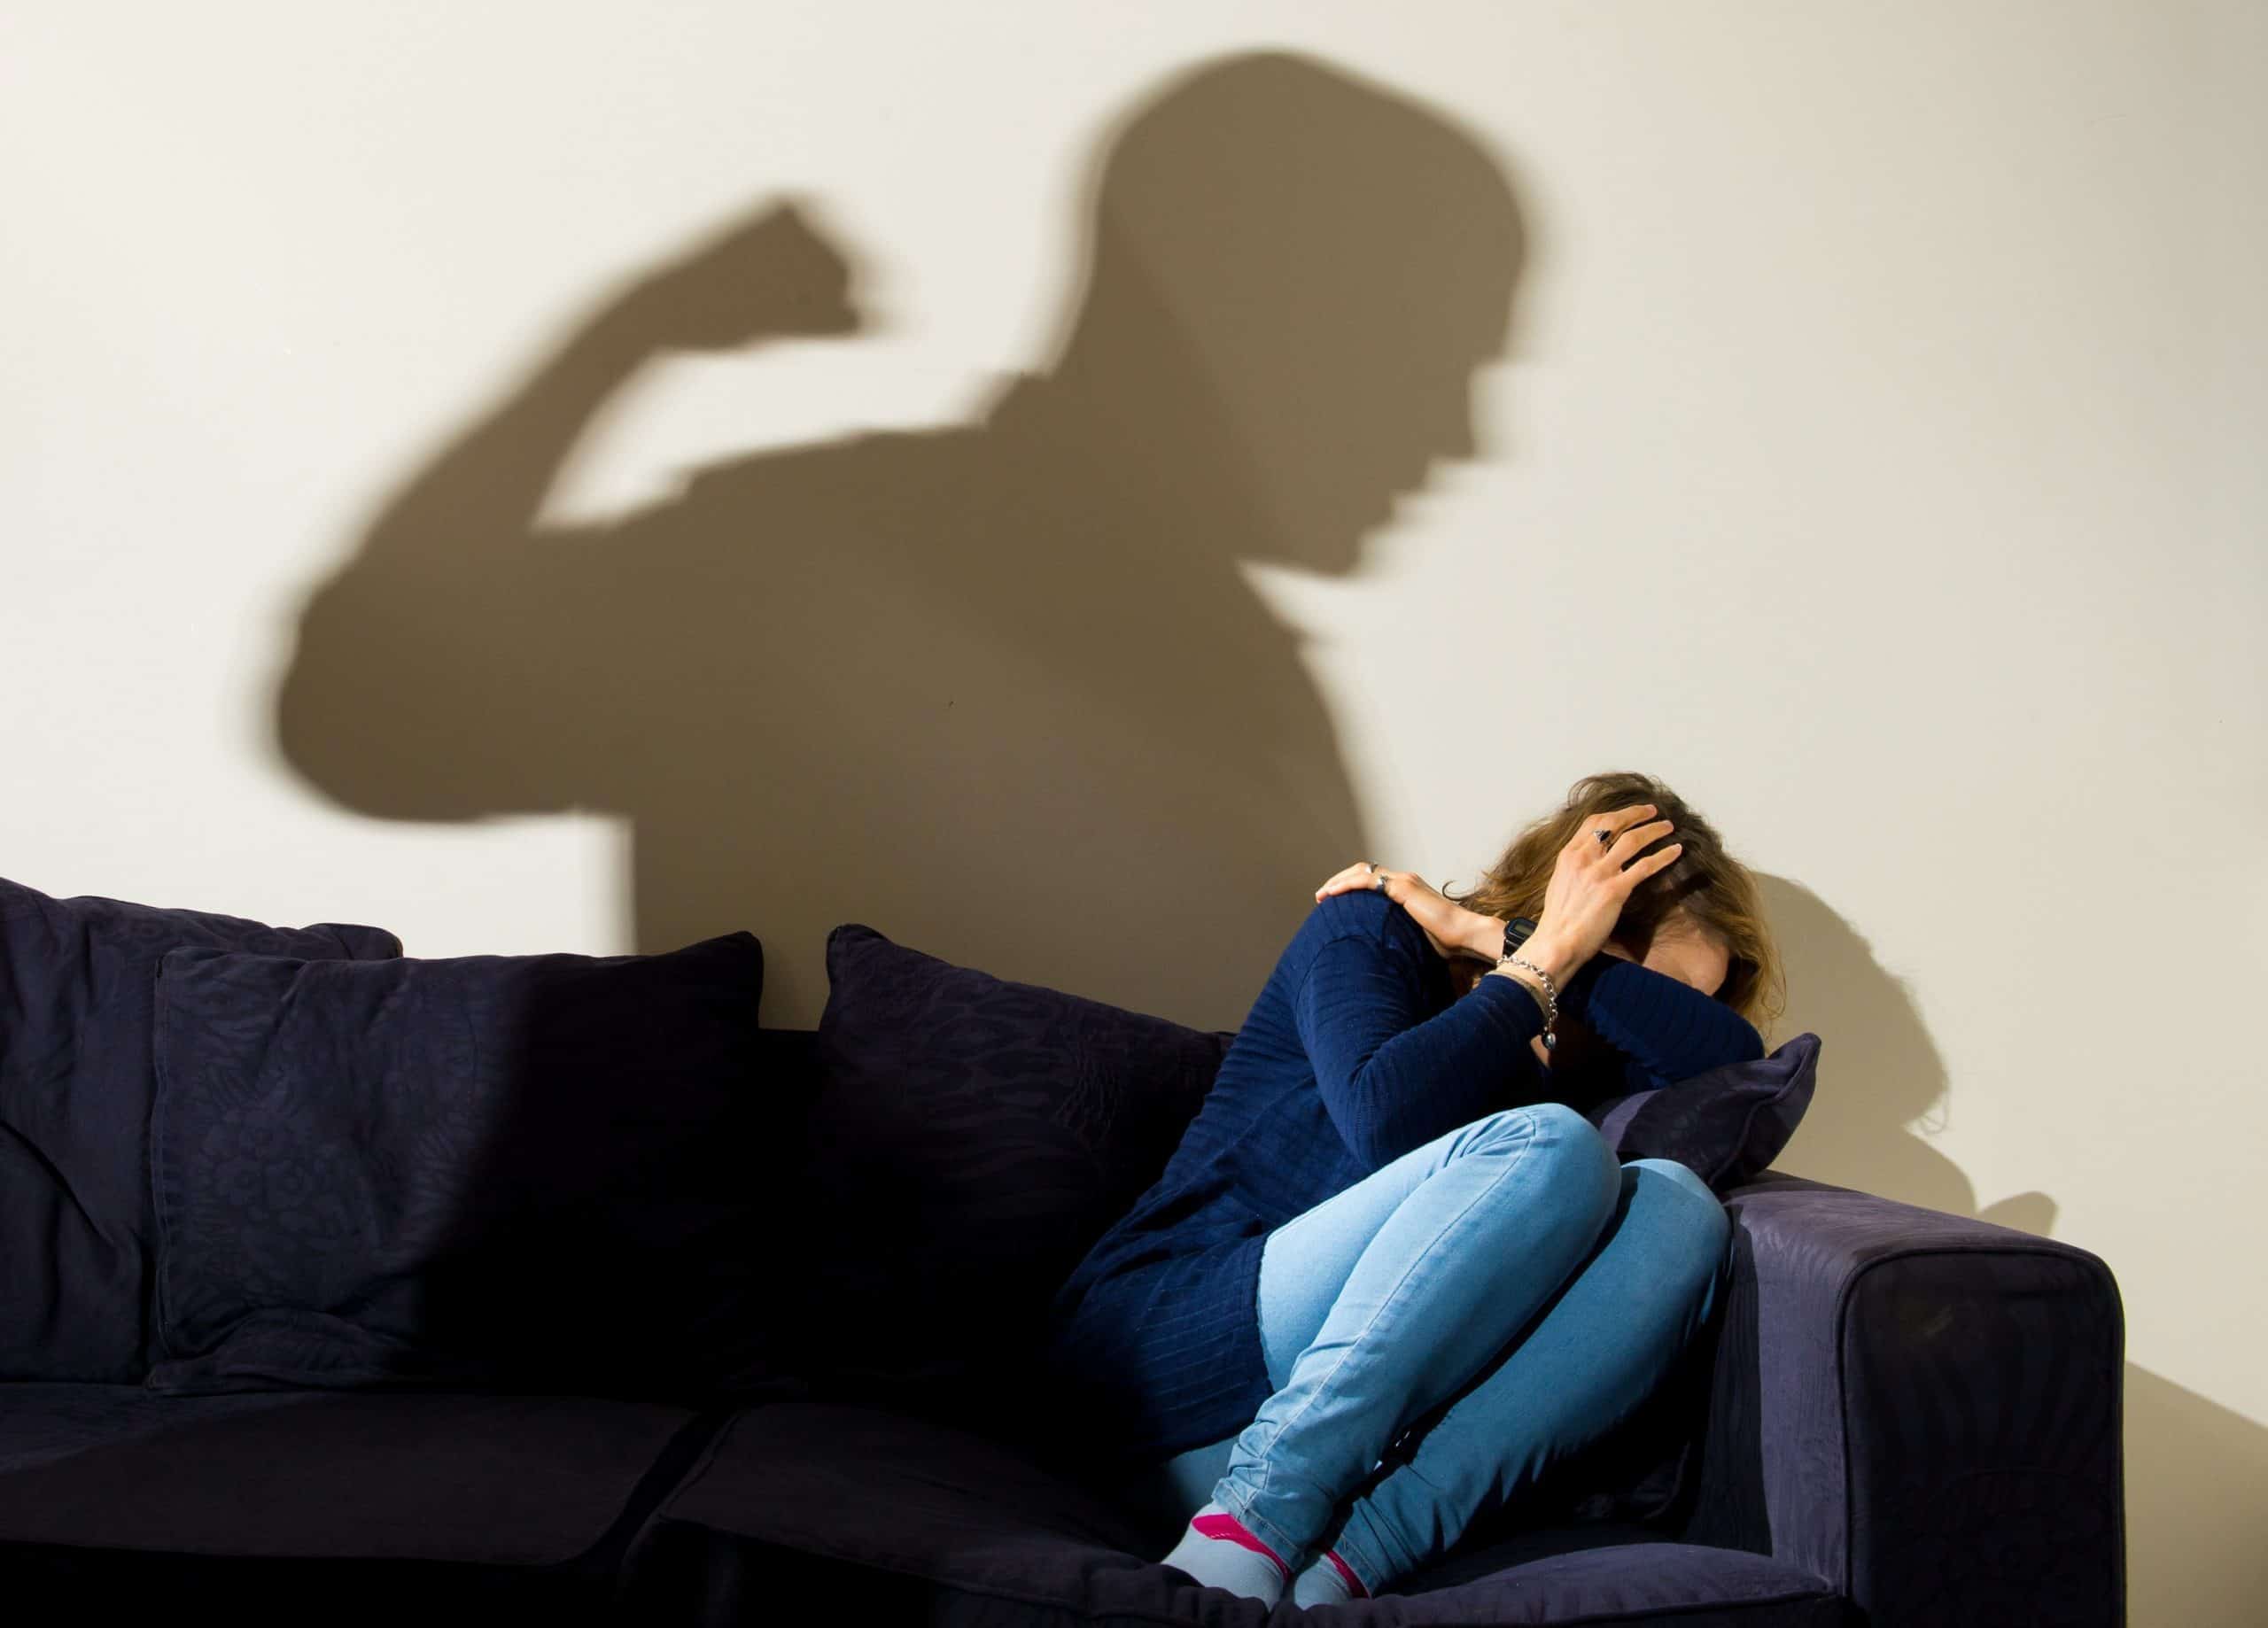 Xmas and Covid ‘heightening risk of domestic abuse’ as ‘thousands of children’ at risk